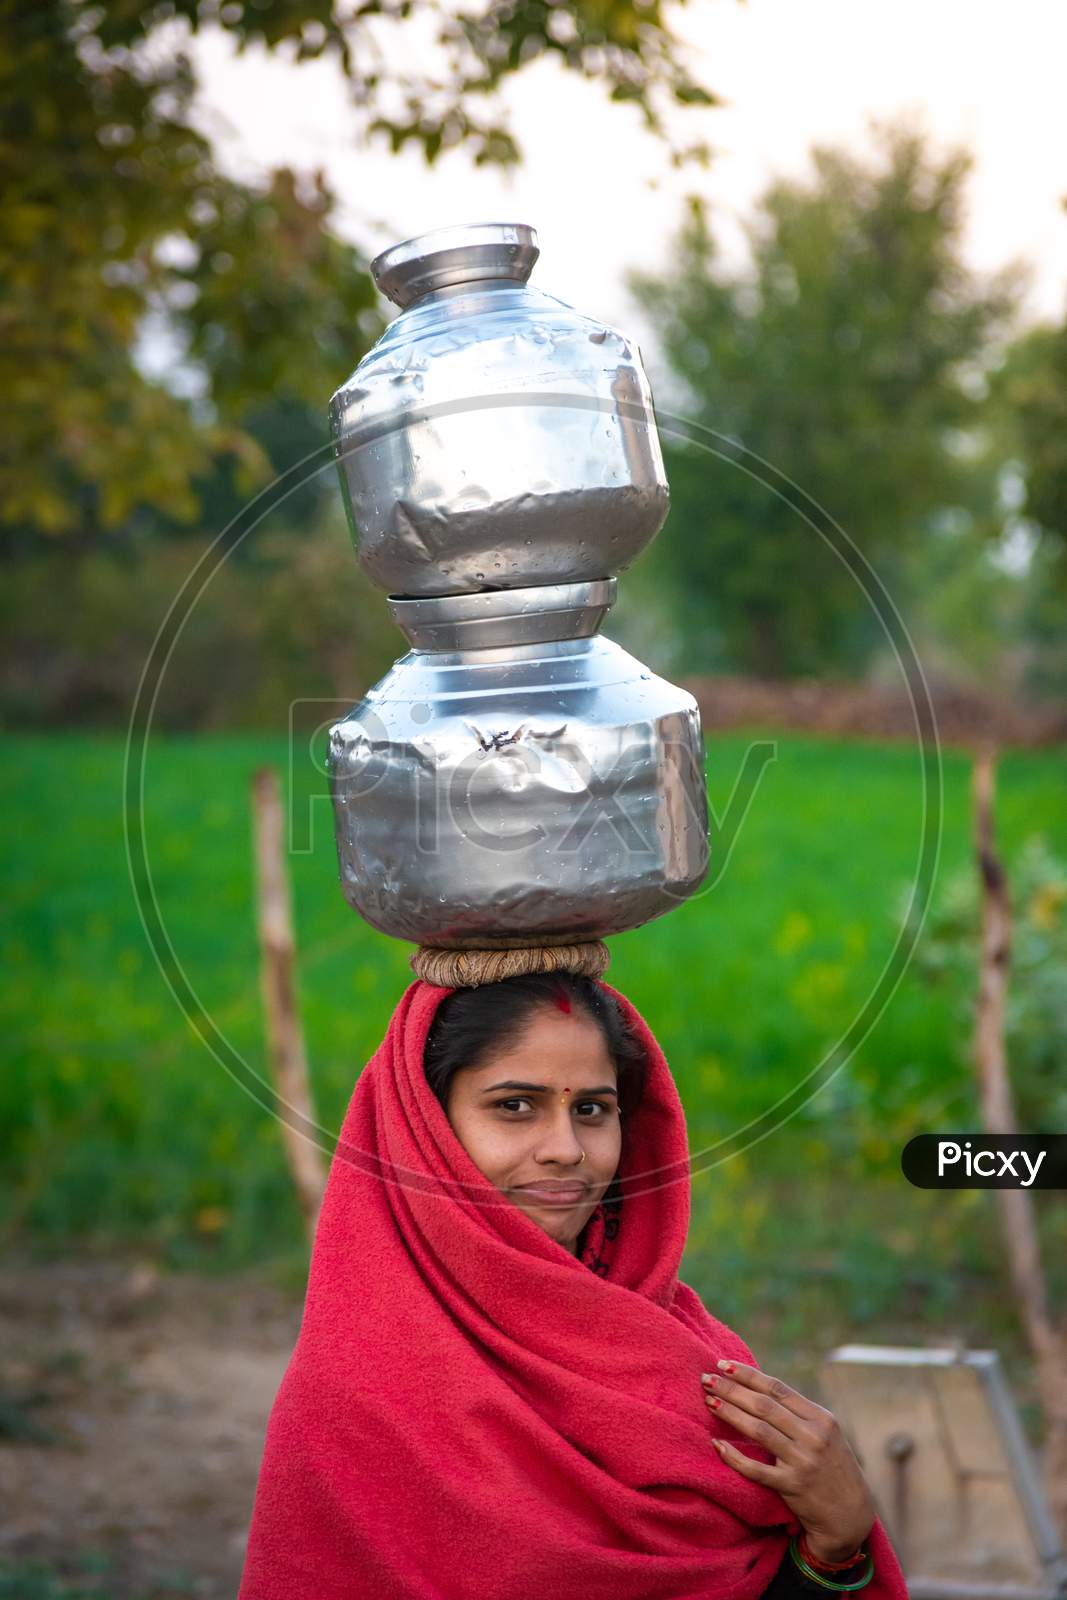 TIKAMGARH, MADHYA PRADESH, INDIA - JANUARY 23, 2021: An Indian woman carrying a container of water on her head.